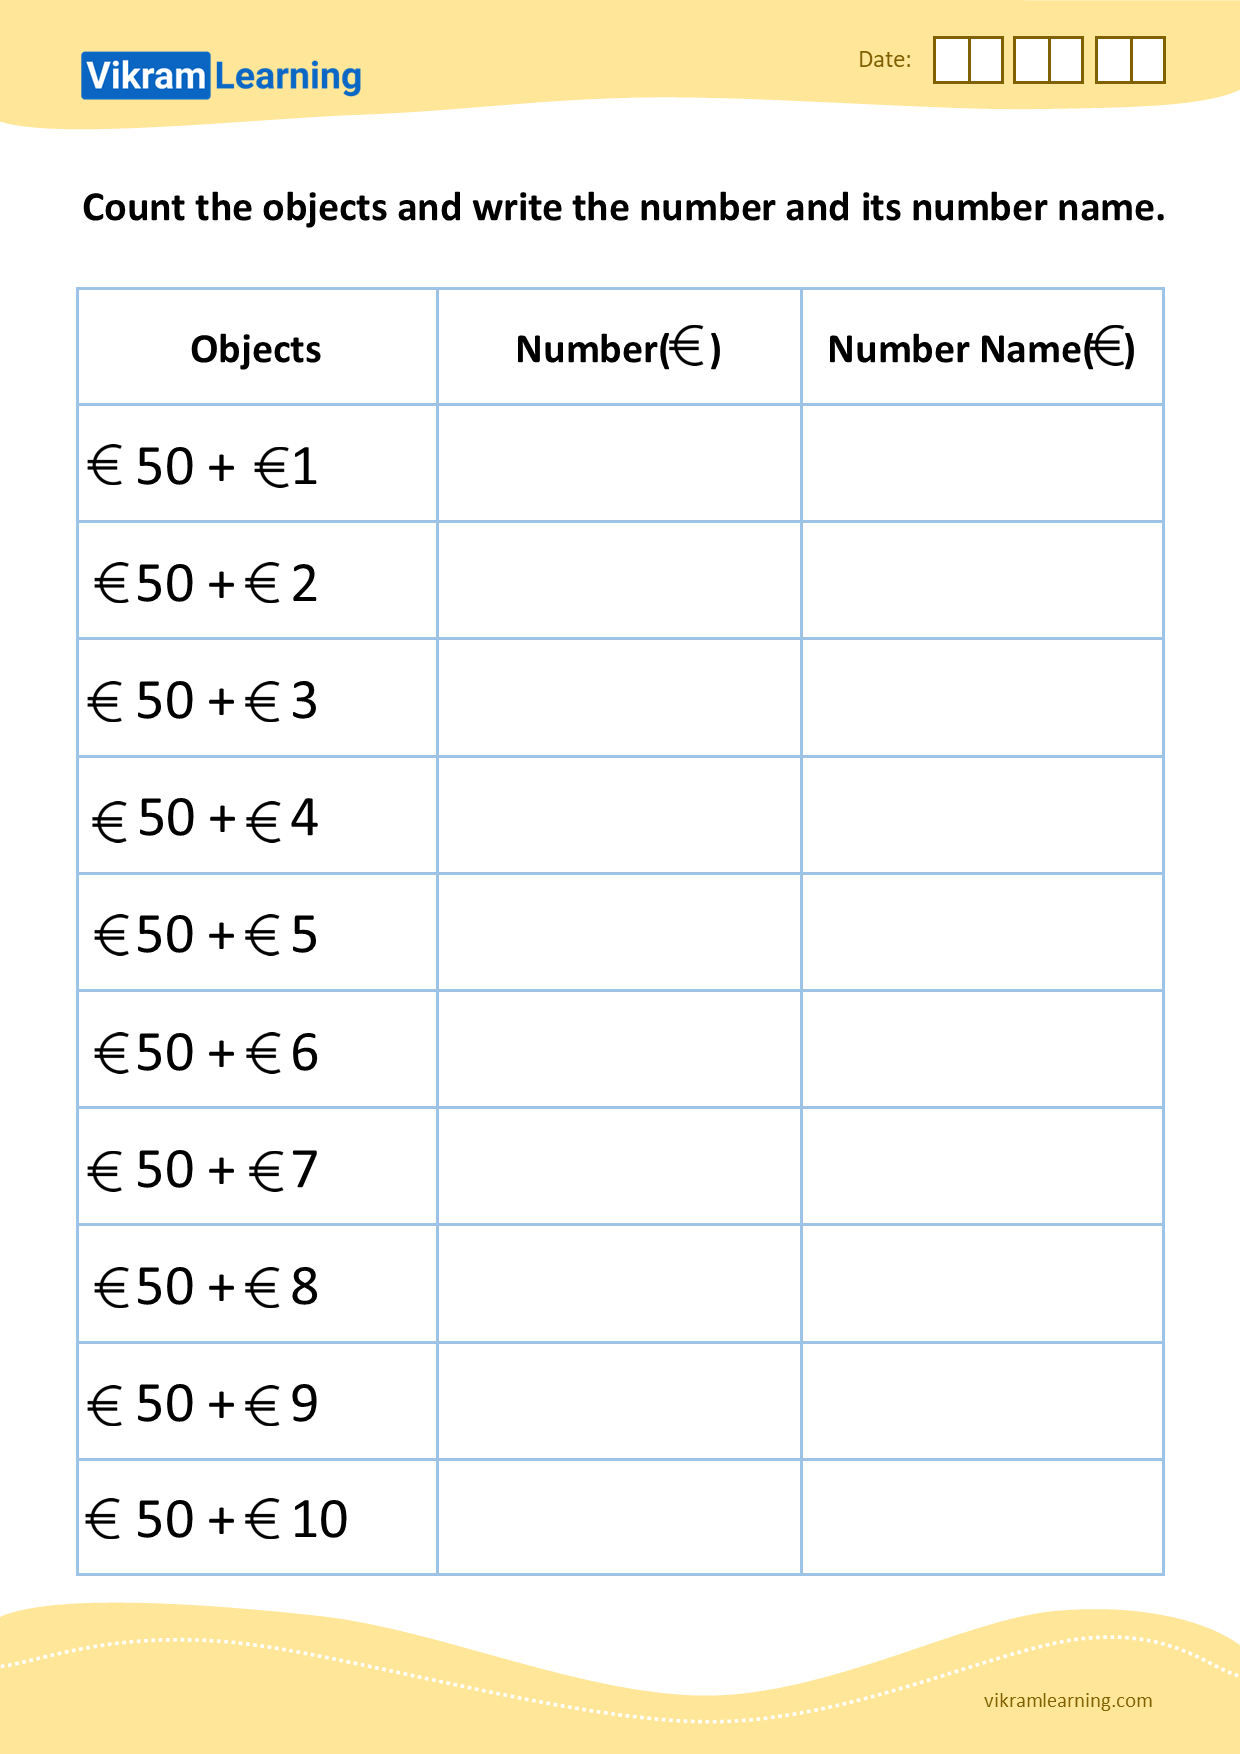 Download count the objects and write the number and its number name - 4 worksheets